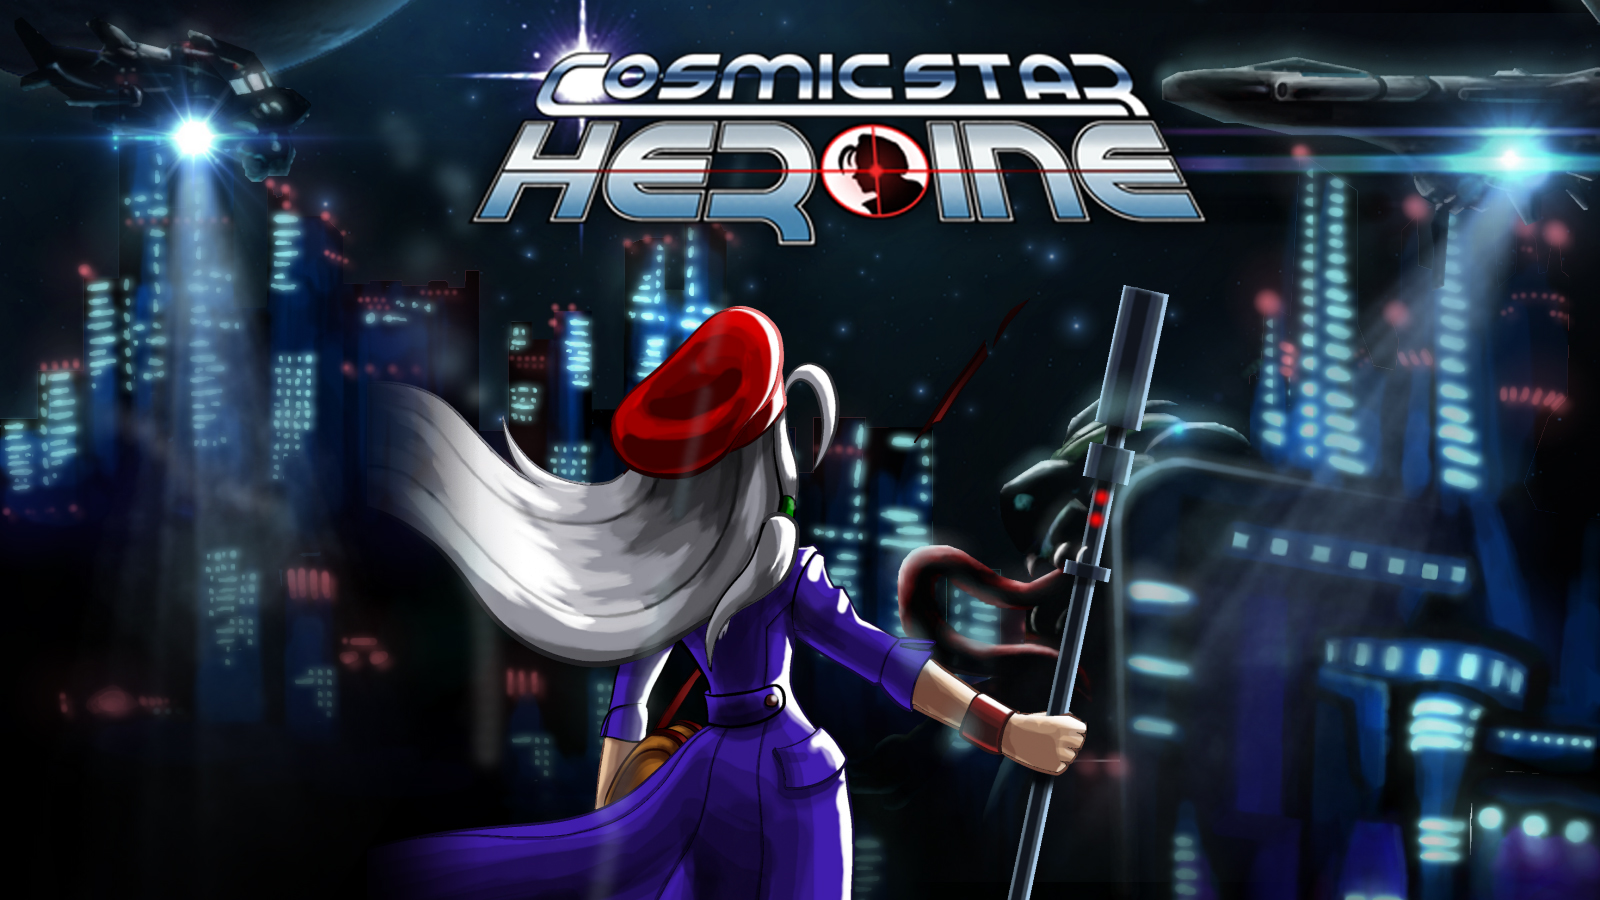  cosmic star heroine switch review